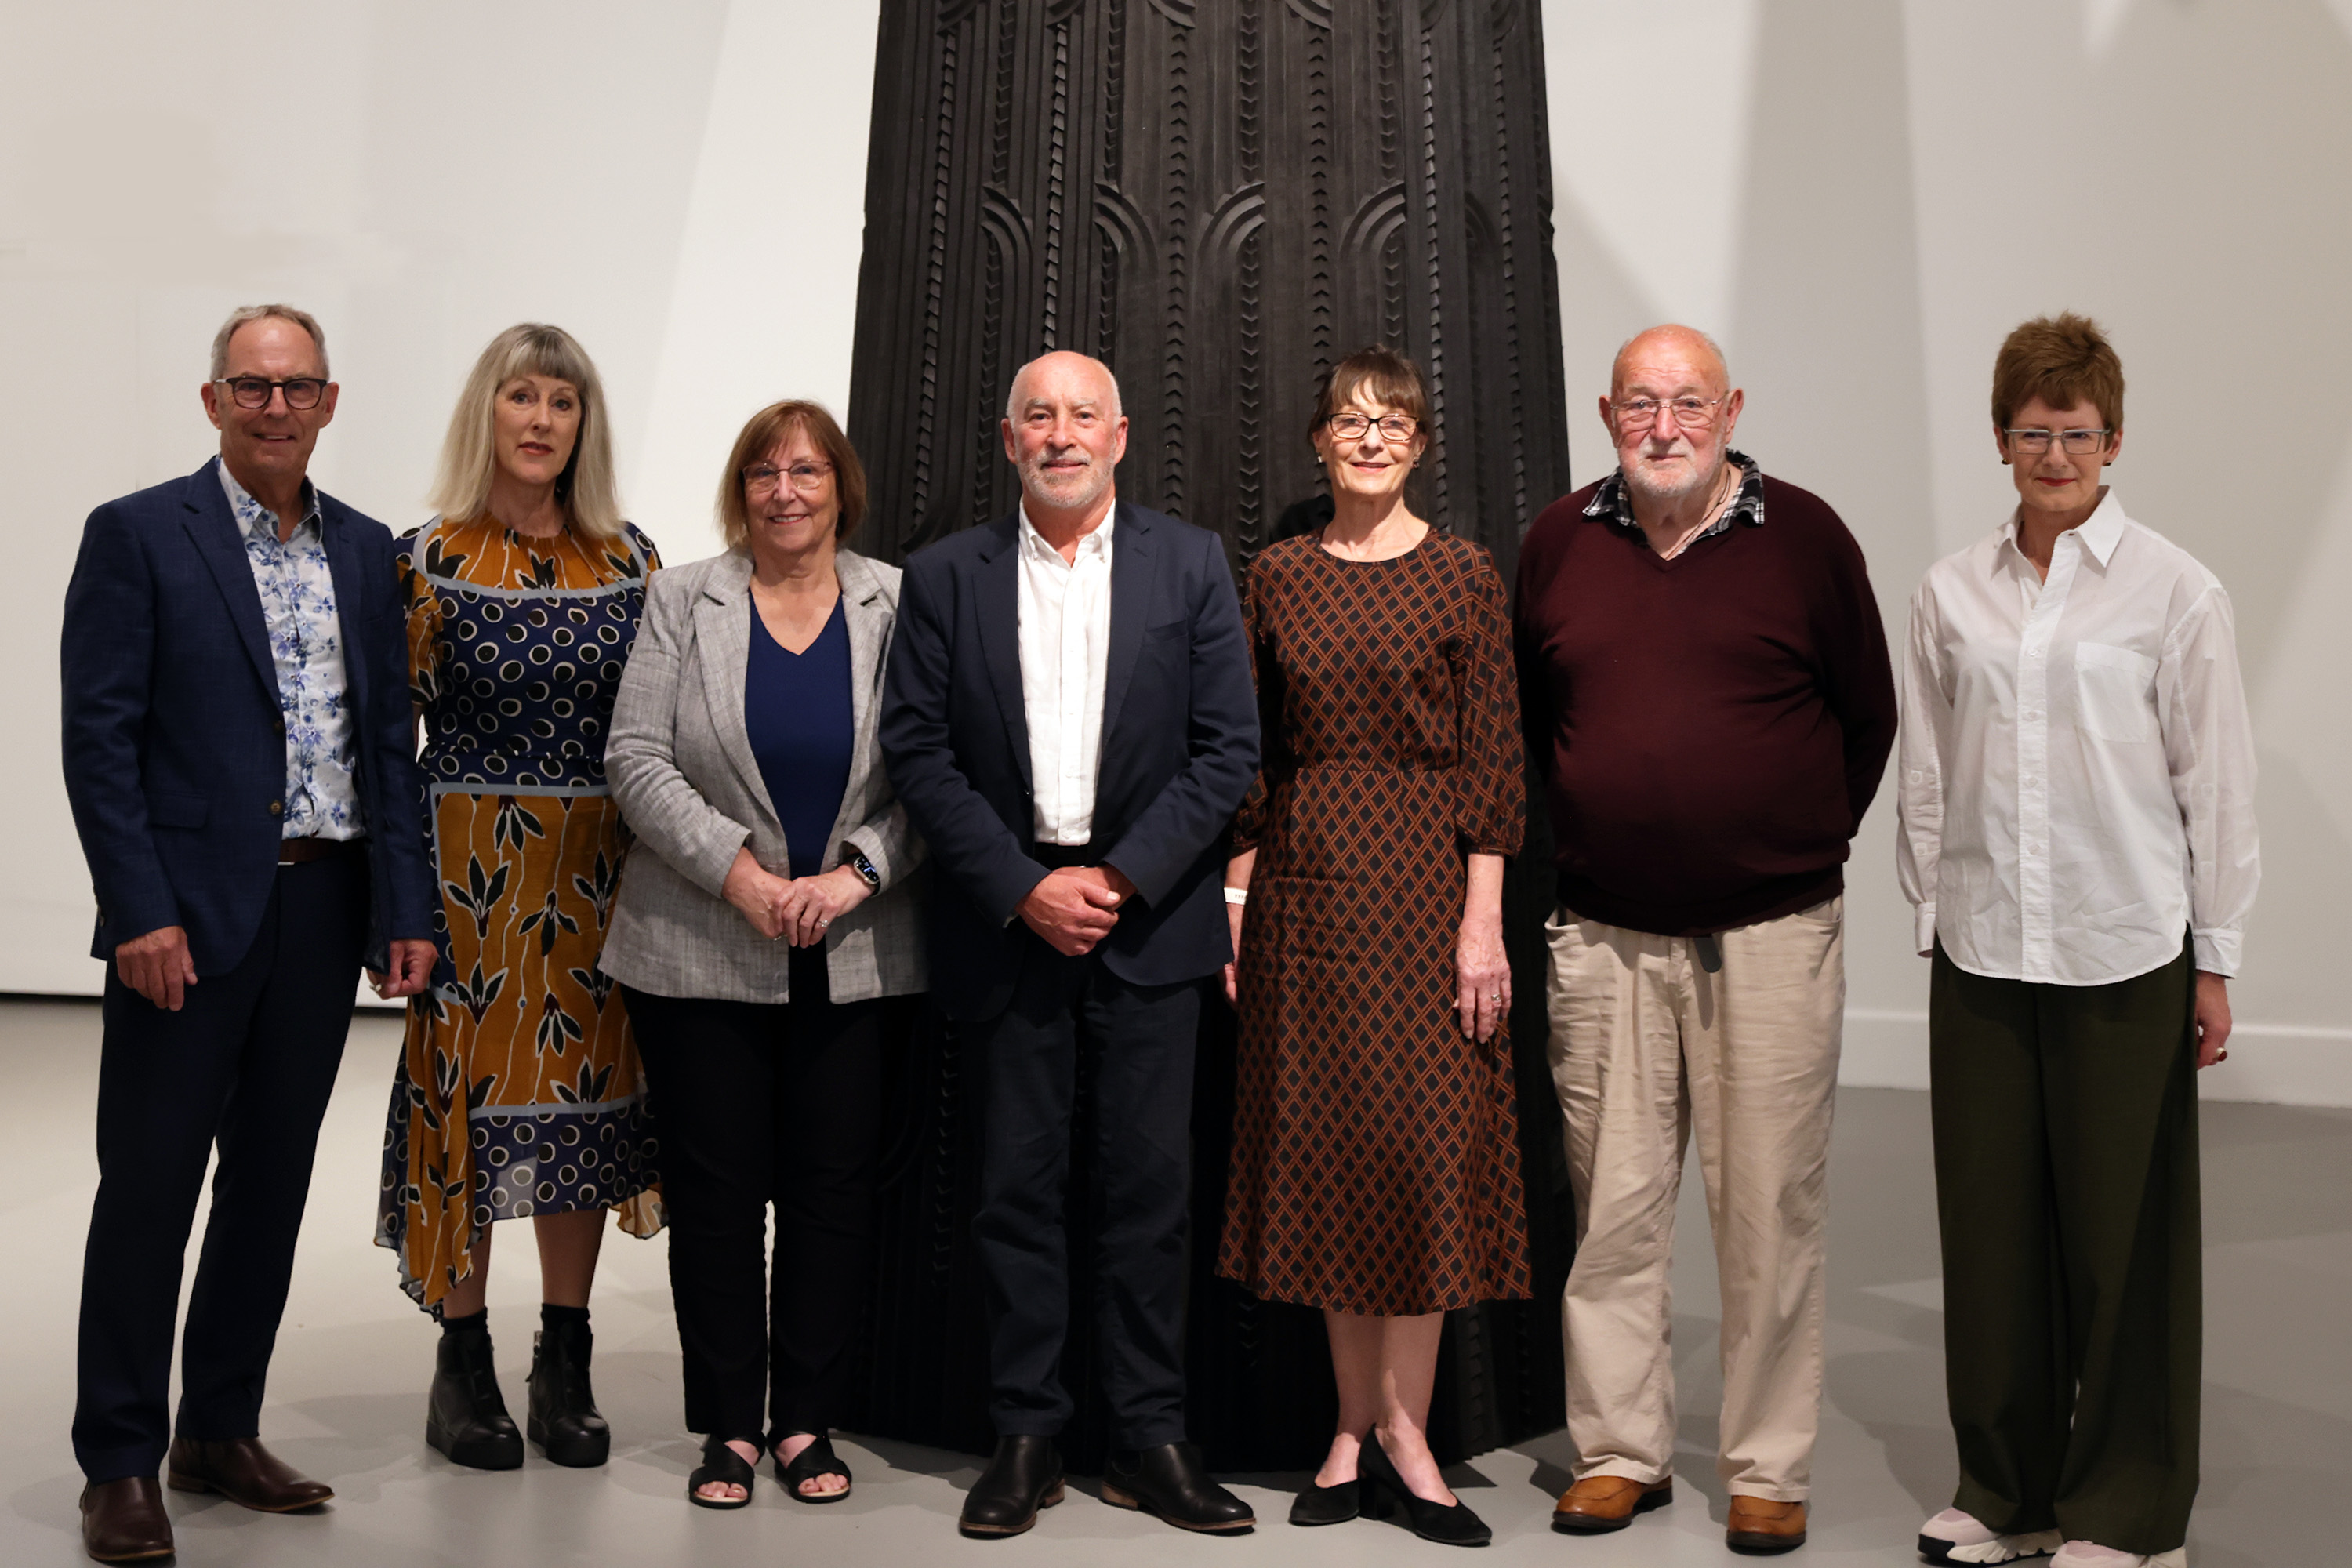 A group of people standing in front of the base of a large black carved sculpture, in a white art gallery space. The sculpture is adorned with fine Māori carvings. 